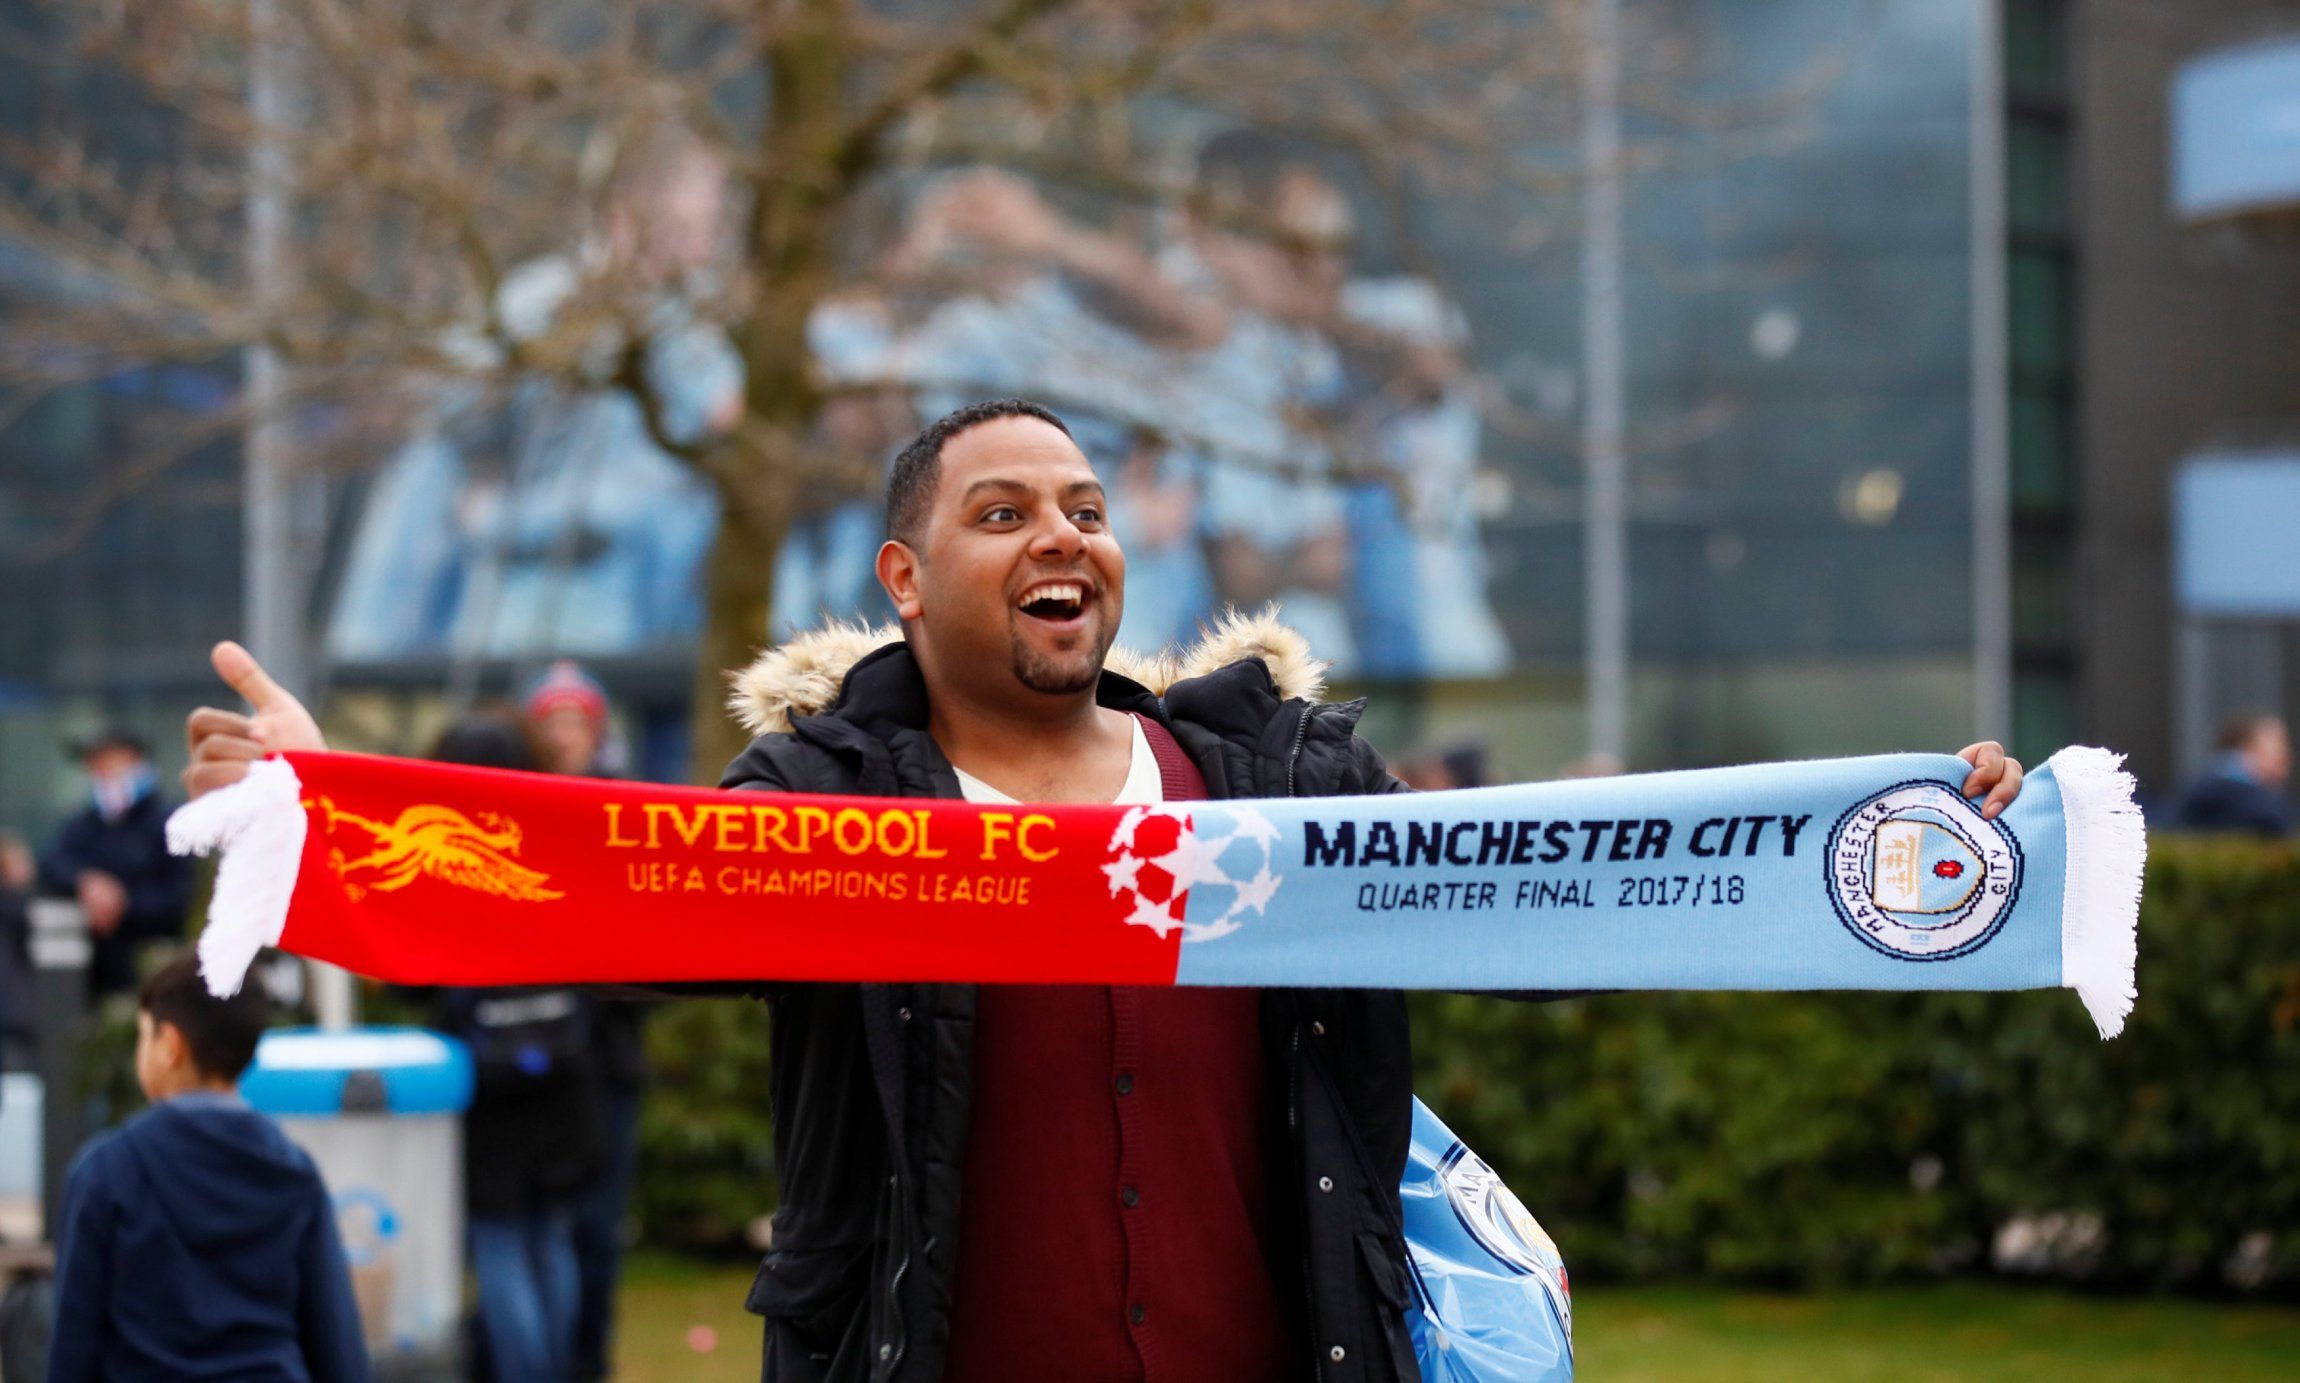 Fan with half and half scarf before Liverpool v Man City Champions League quarter final